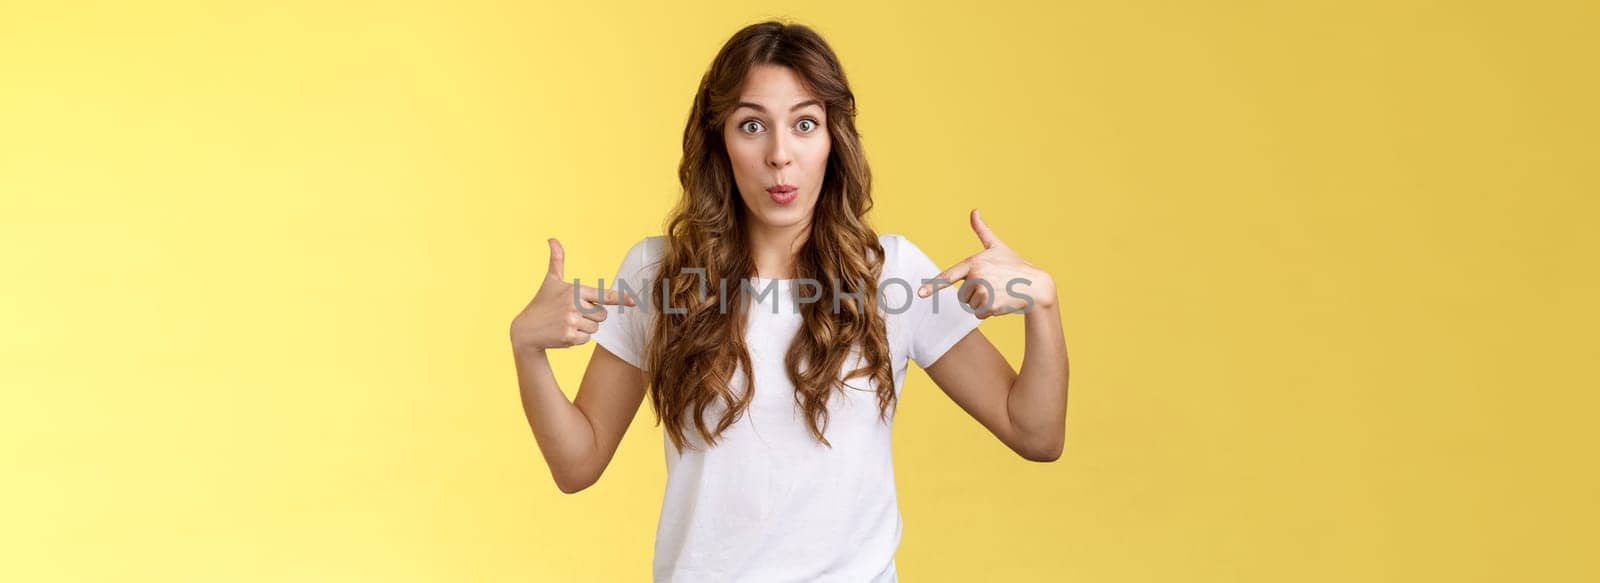 Wow just look. Impressed surprised cute wondered european girl pointing fingers center copy space white t-shirt folding lips amused astonished awesome promo great chance gaze you camera by Benzoix